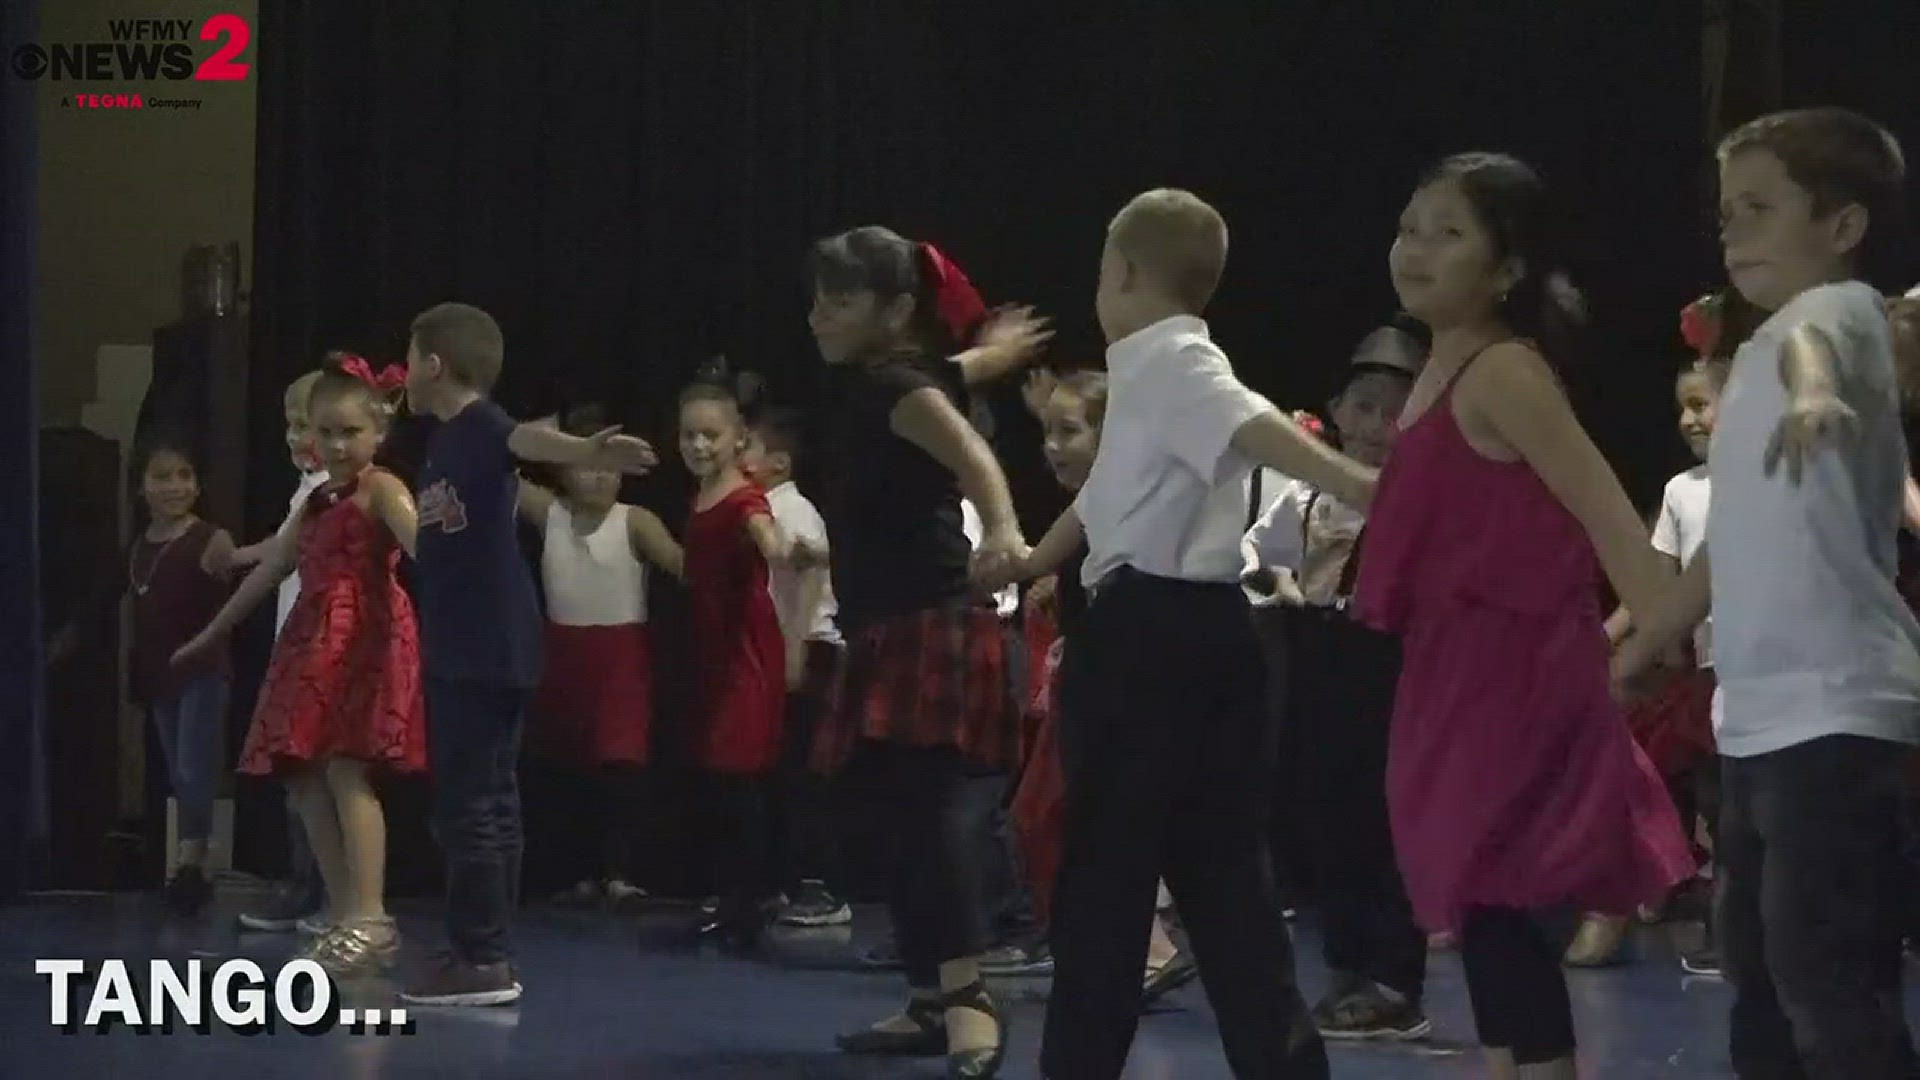 Students Think Globally Through Multicultural Dance